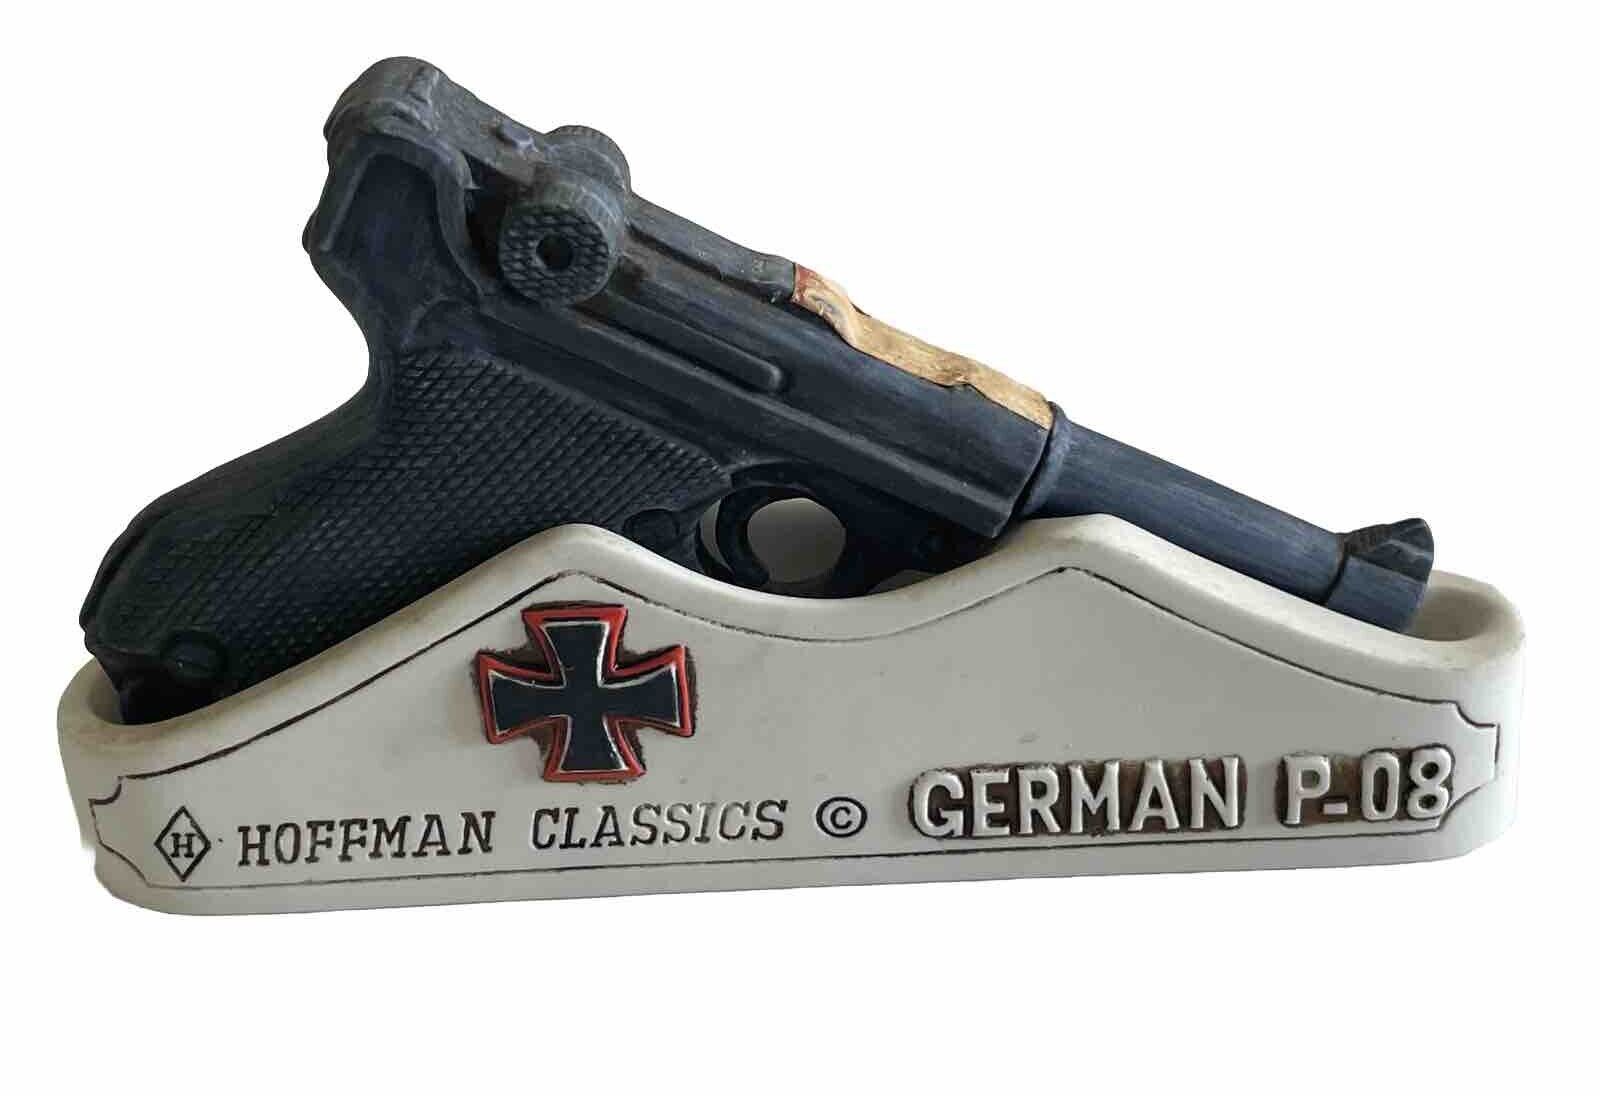 Hoffman Classics DECANTER German P-08 Luger Pistol Revolver with Stand 1970 Rare